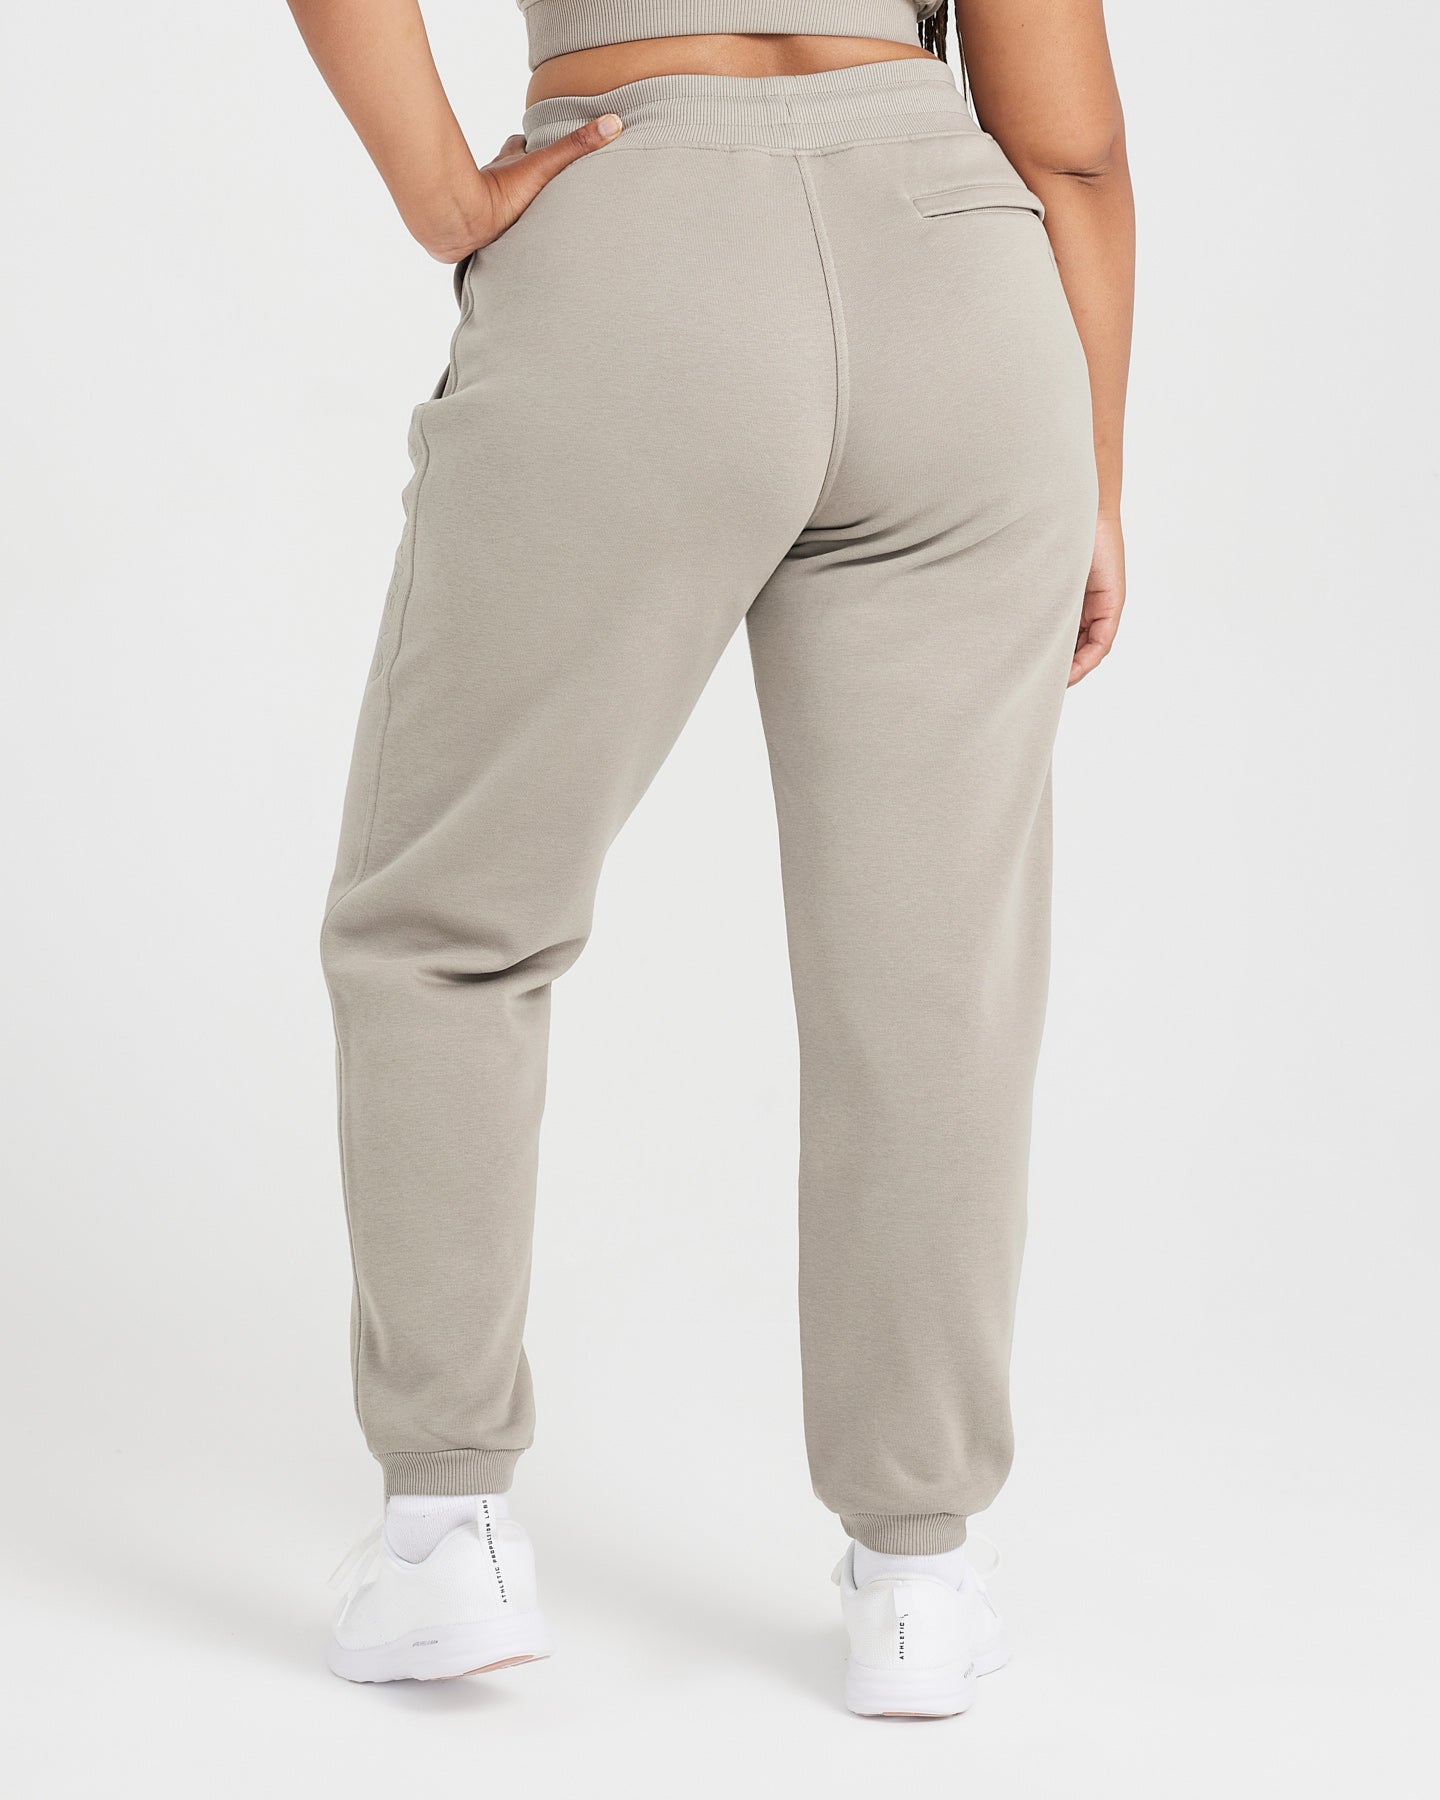 COMFY JOGGER for WOMEN - Warm Sand